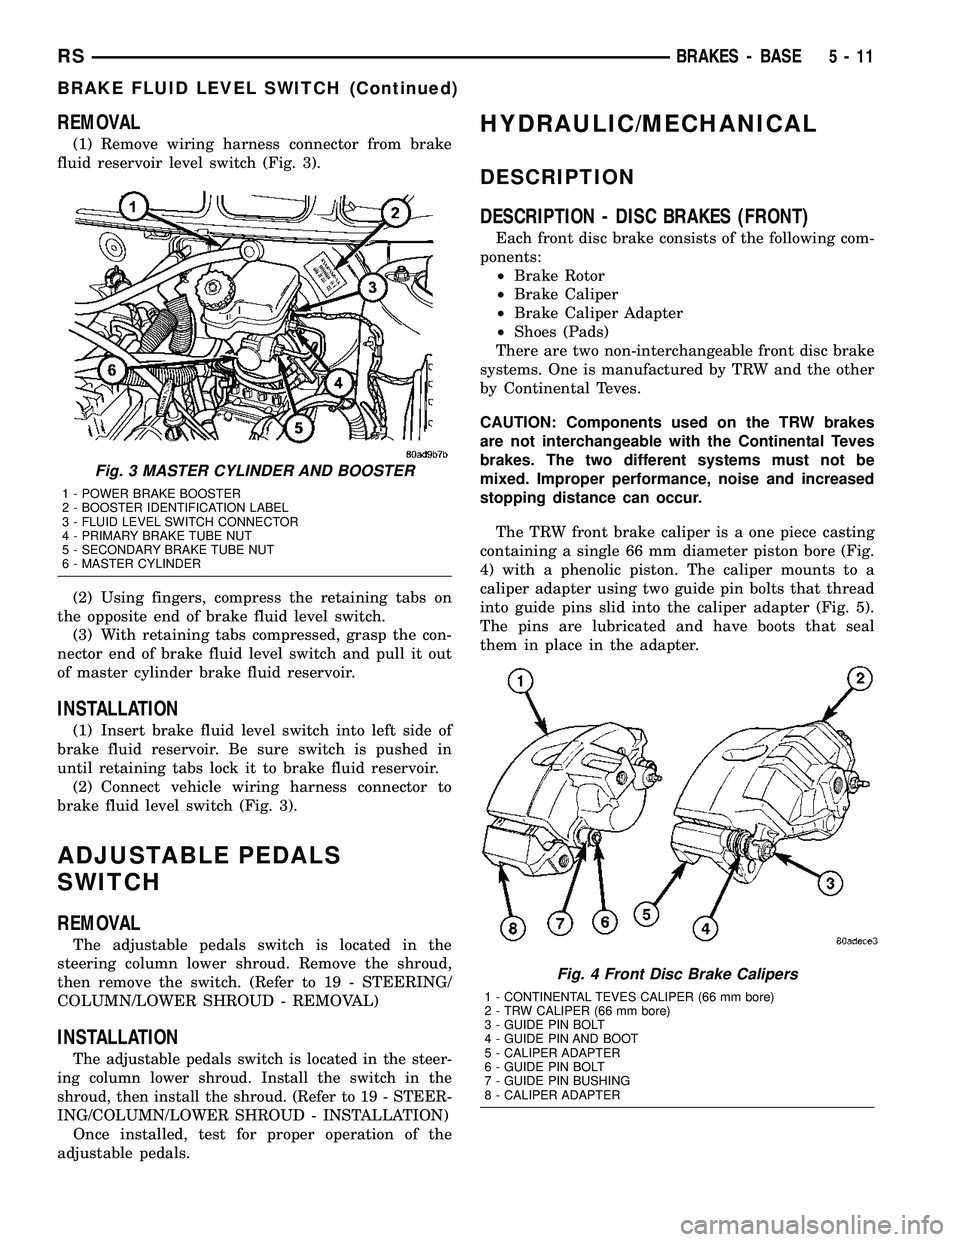 CHRYSLER VOYAGER 2005  Service Manual REMOVAL
(1) Remove wiring harness connector from brake
fluid reservoir level switch (Fig. 3).
(2) Using fingers, compress the retaining tabs on
the opposite end of brake fluid level switch.
(3) With r